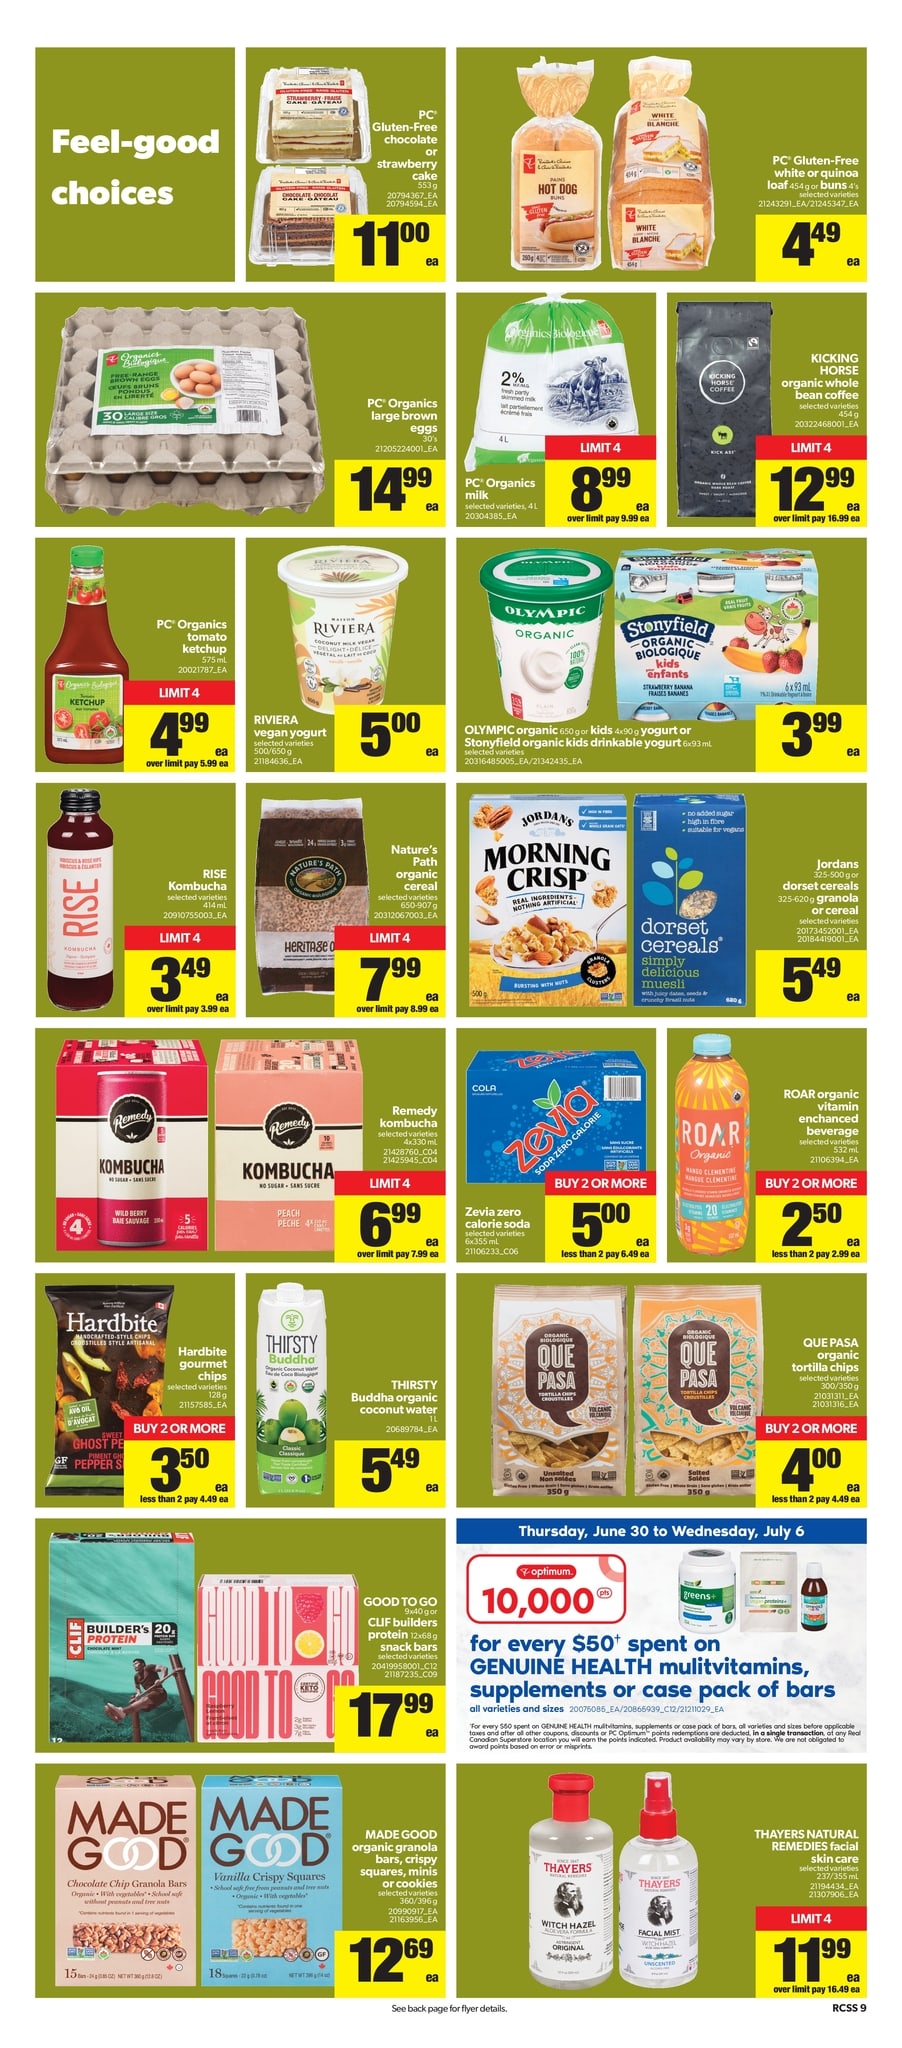 Real Canadian Superstore Ontario - Weekly Flyer Specials - Page 10